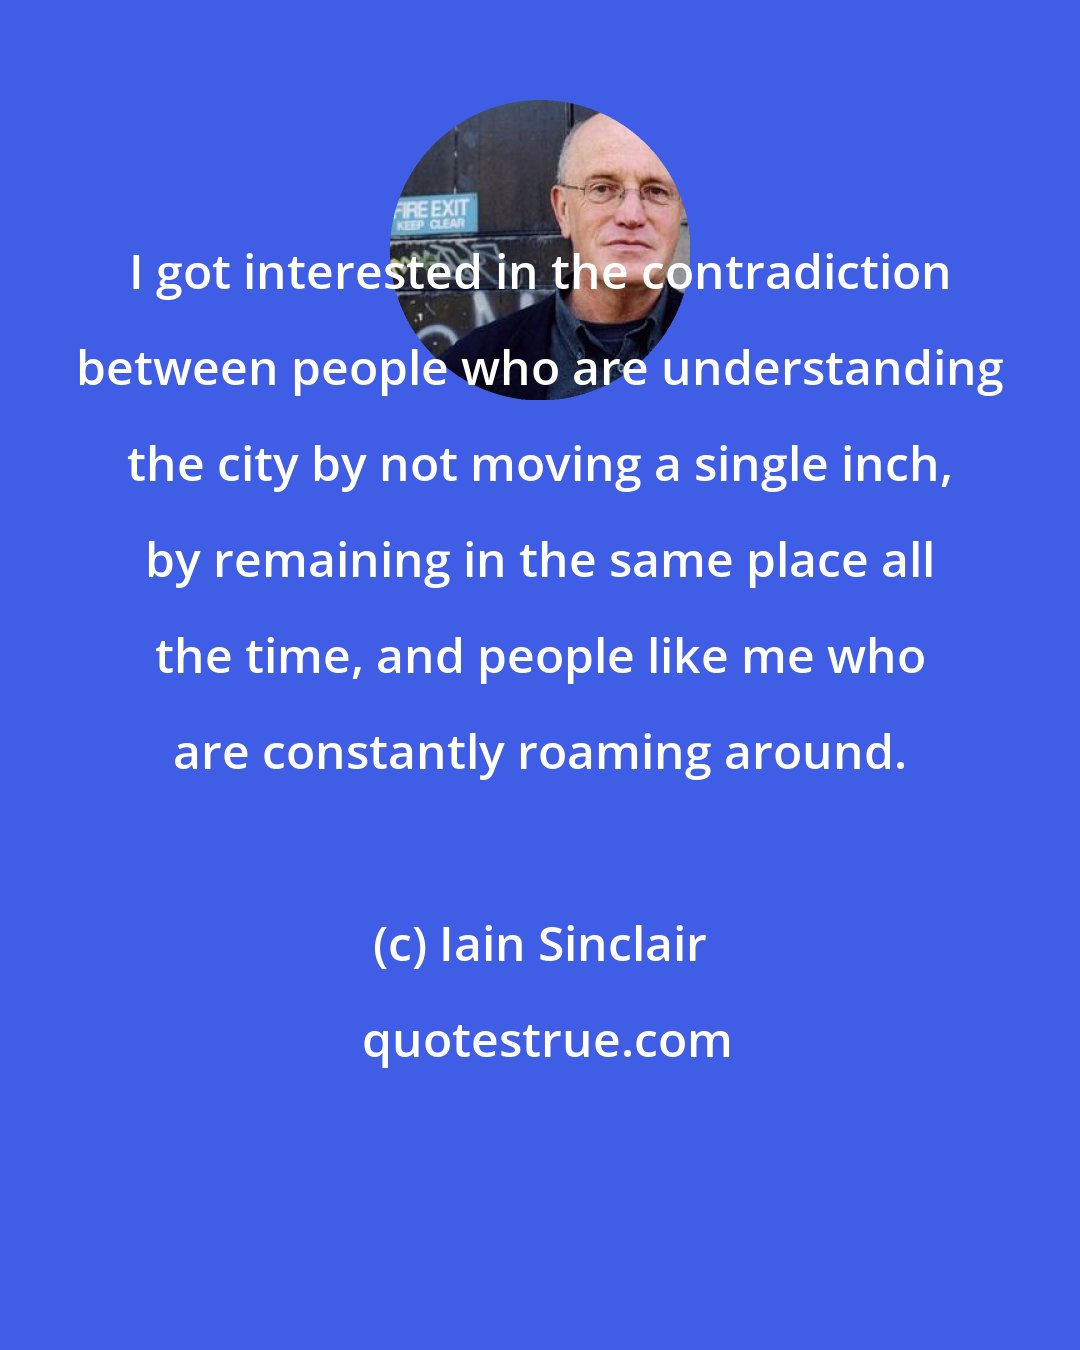 Iain Sinclair: I got interested in the contradiction between people who are understanding the city by not moving a single inch, by remaining in the same place all the time, and people like me who are constantly roaming around.